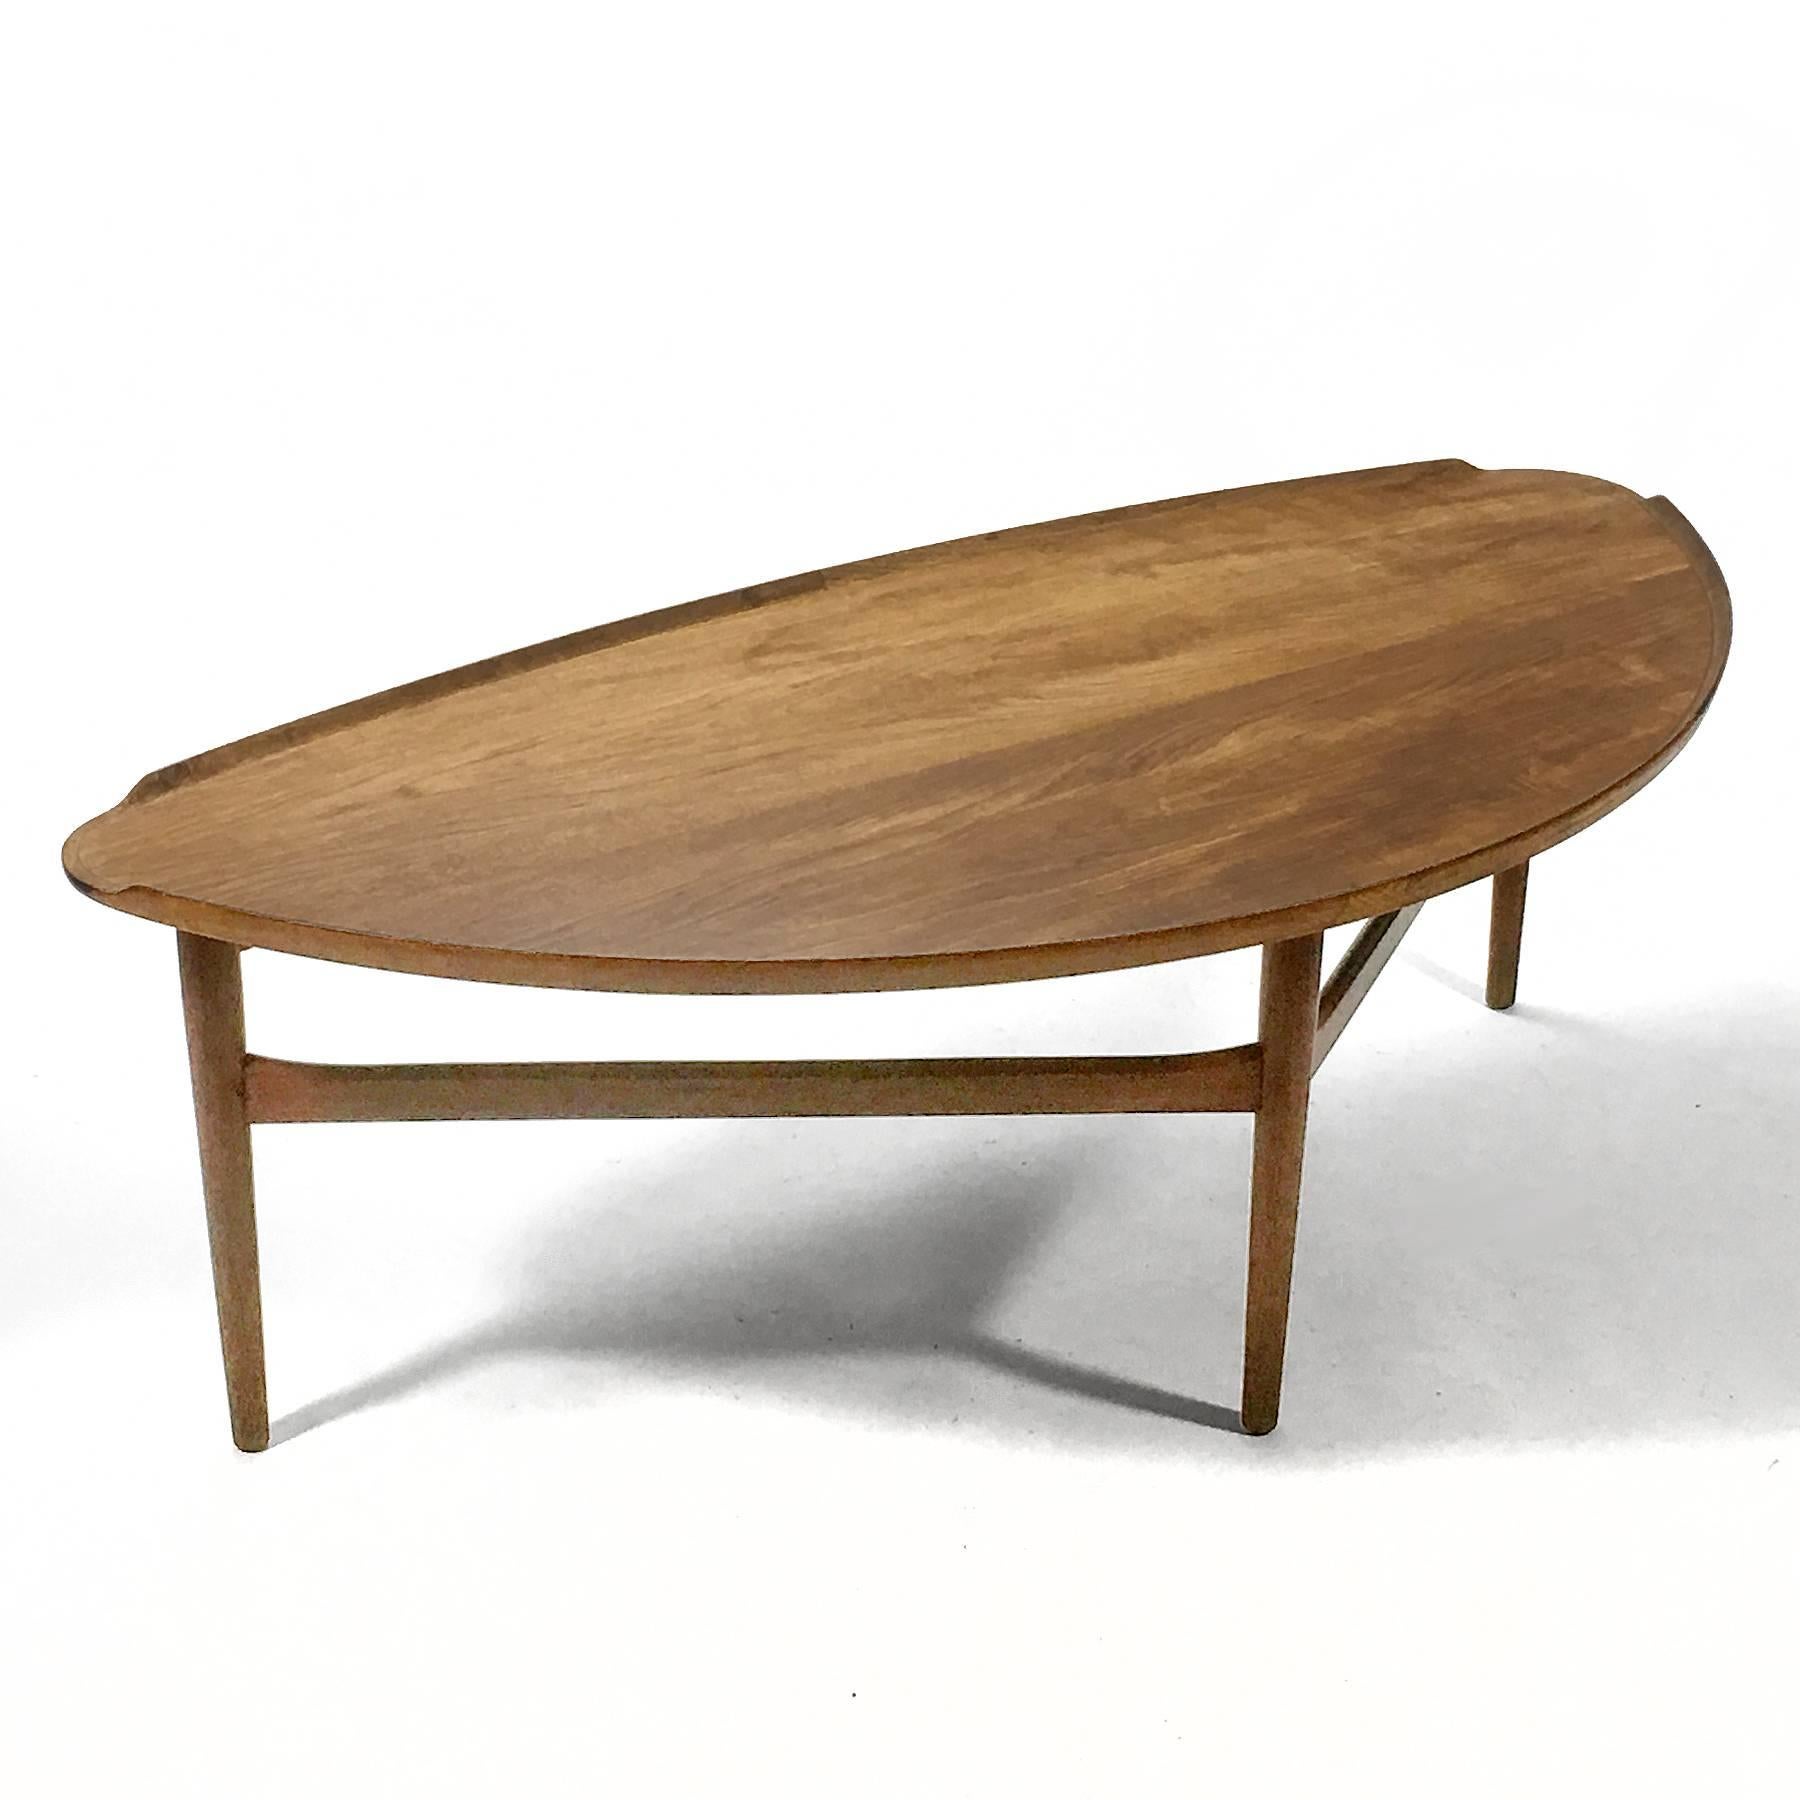 This table was designed by Danish master Finn Juhl and crafted by Baker Furniture in the US in the 1950s.
Finn Juhl was skeptical that any American manufacturer could produce his designs to his exacting standards. After visiting Baker Furniture in